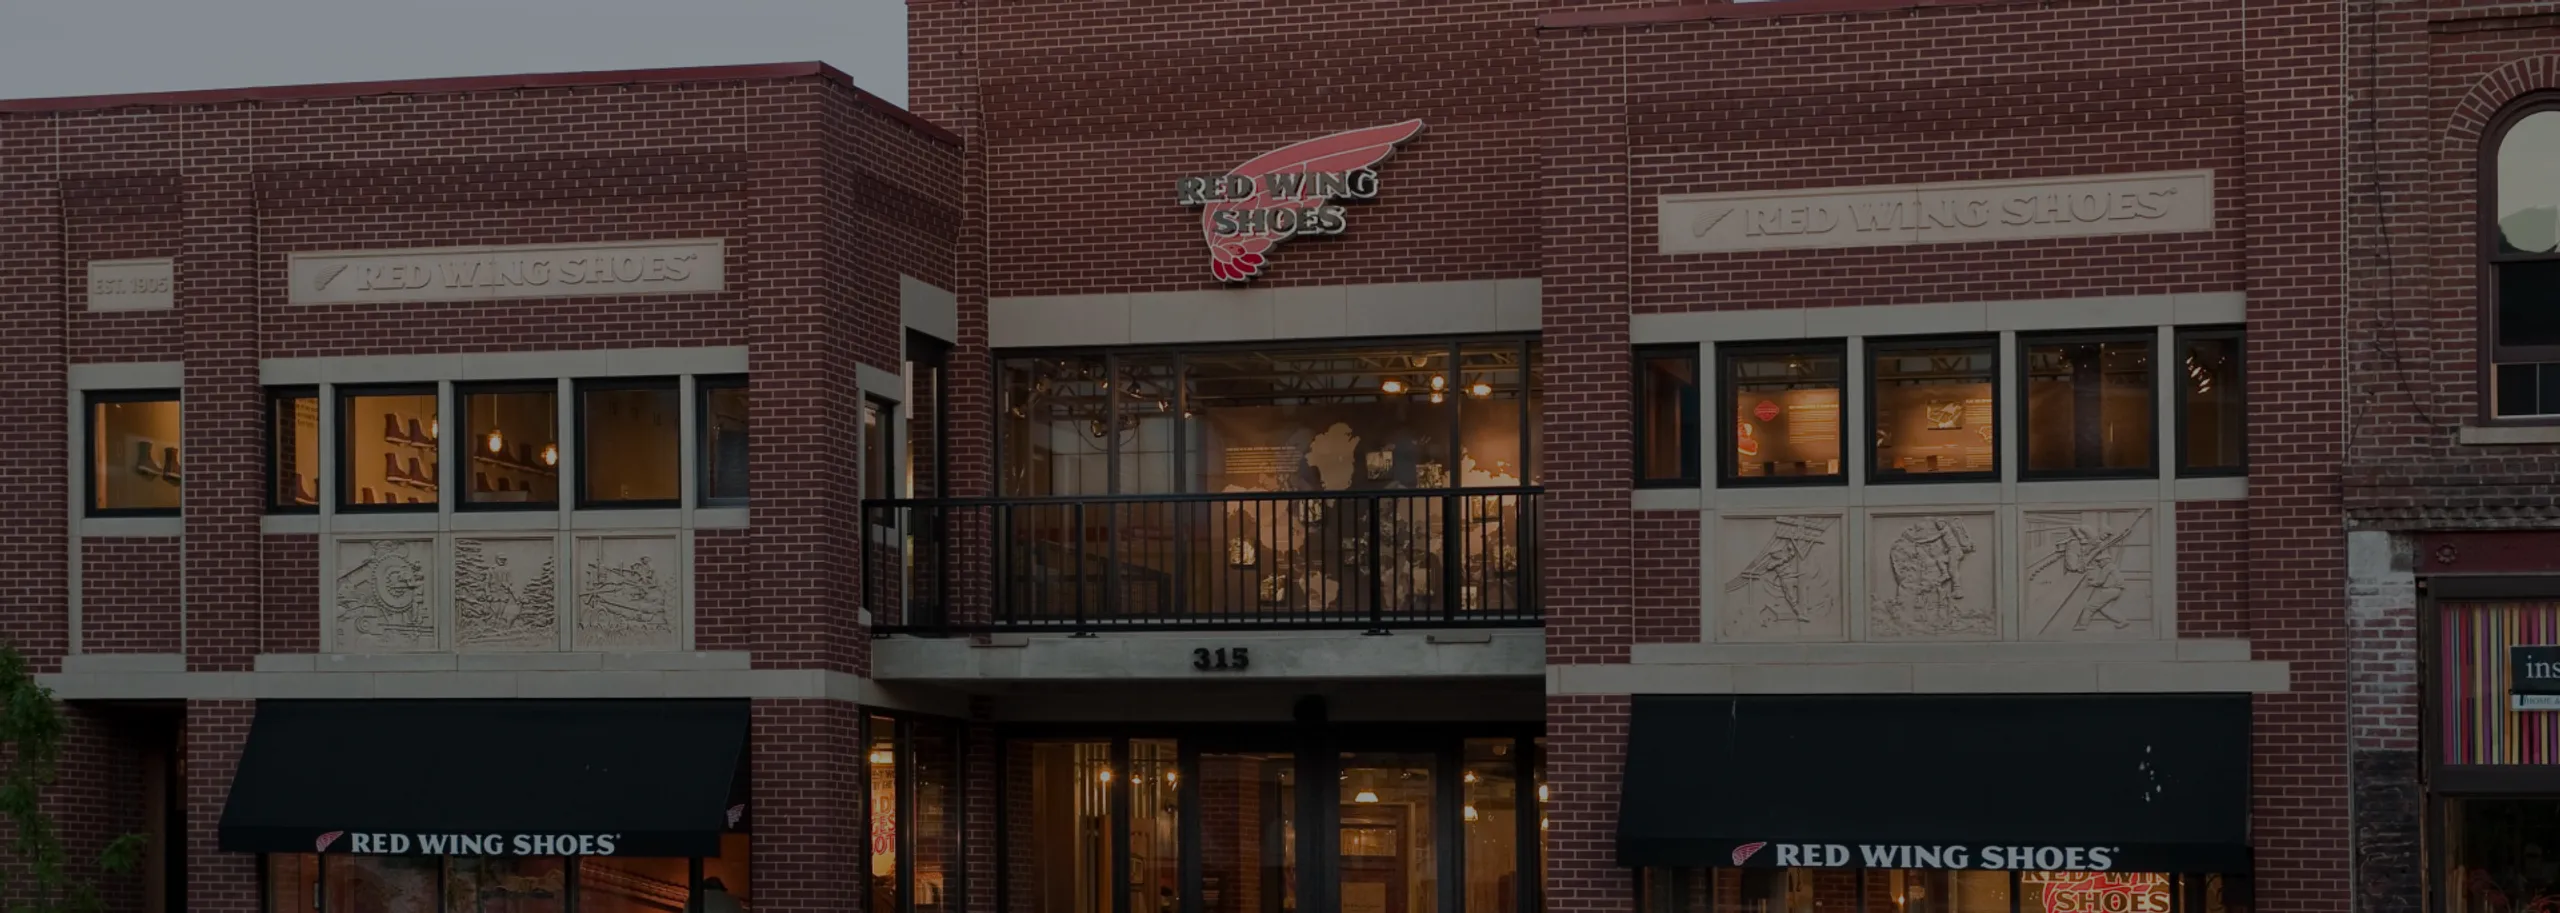 Red Wing Shoe Company Museum